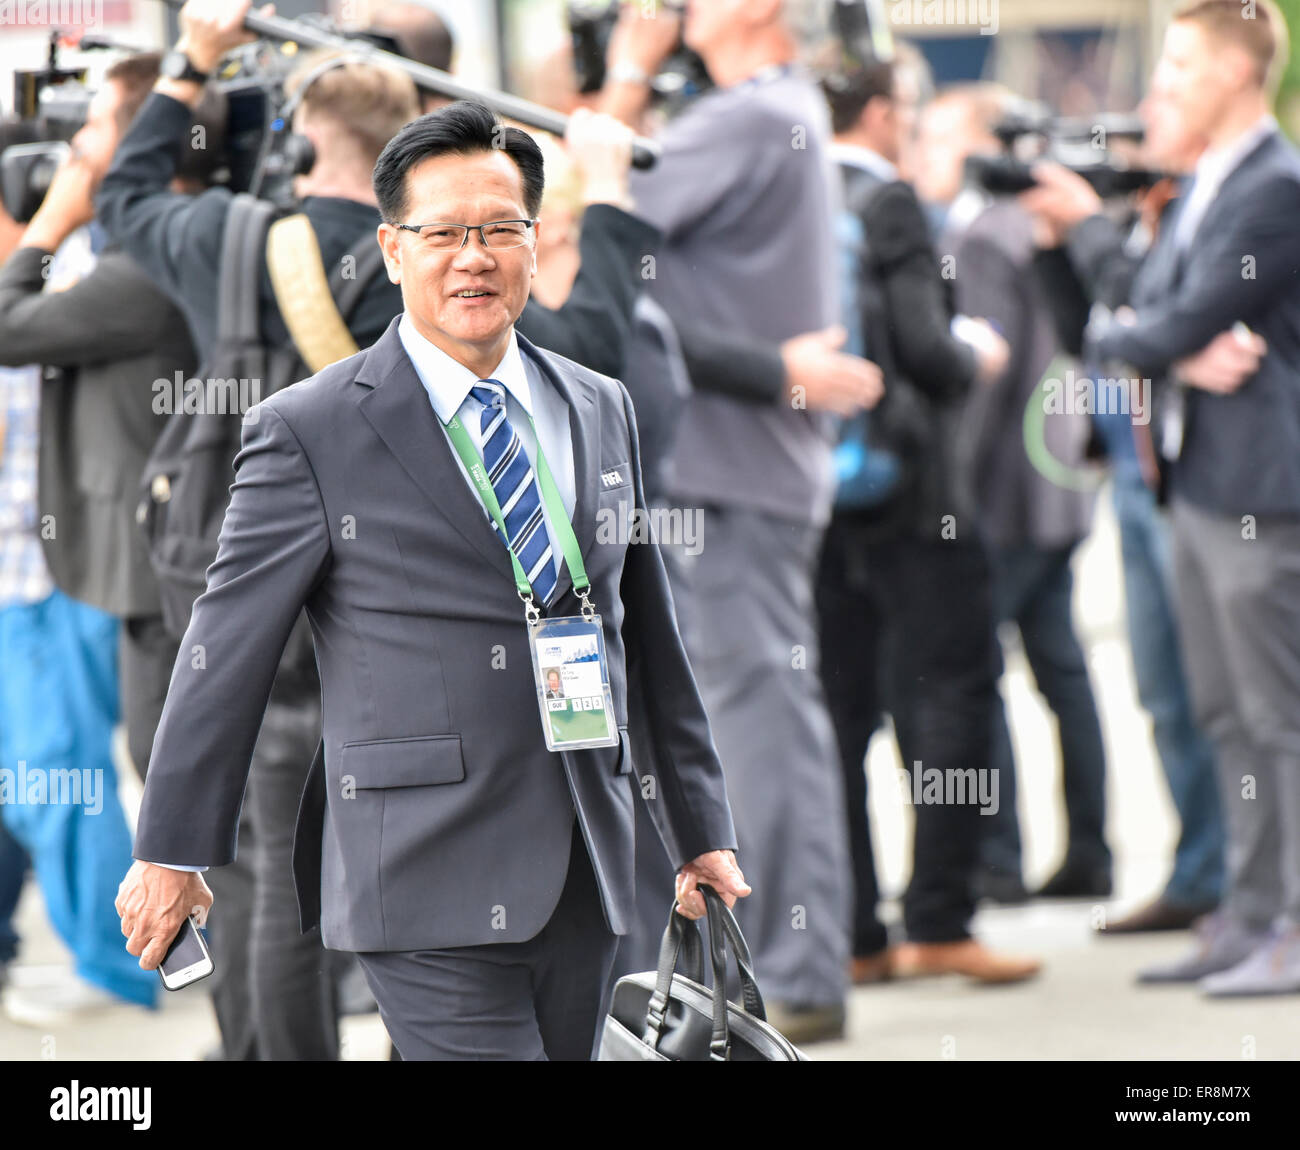 Zurich, Switzerland. 29th May, 2015. Kia Tong Lim, vice president of the Football Association of Singapore (FAS) arrives at Zurich Hallenstadion for the 2015 FIFA congress. Credit:  thamerpic/Alamy Live News Stock Photo